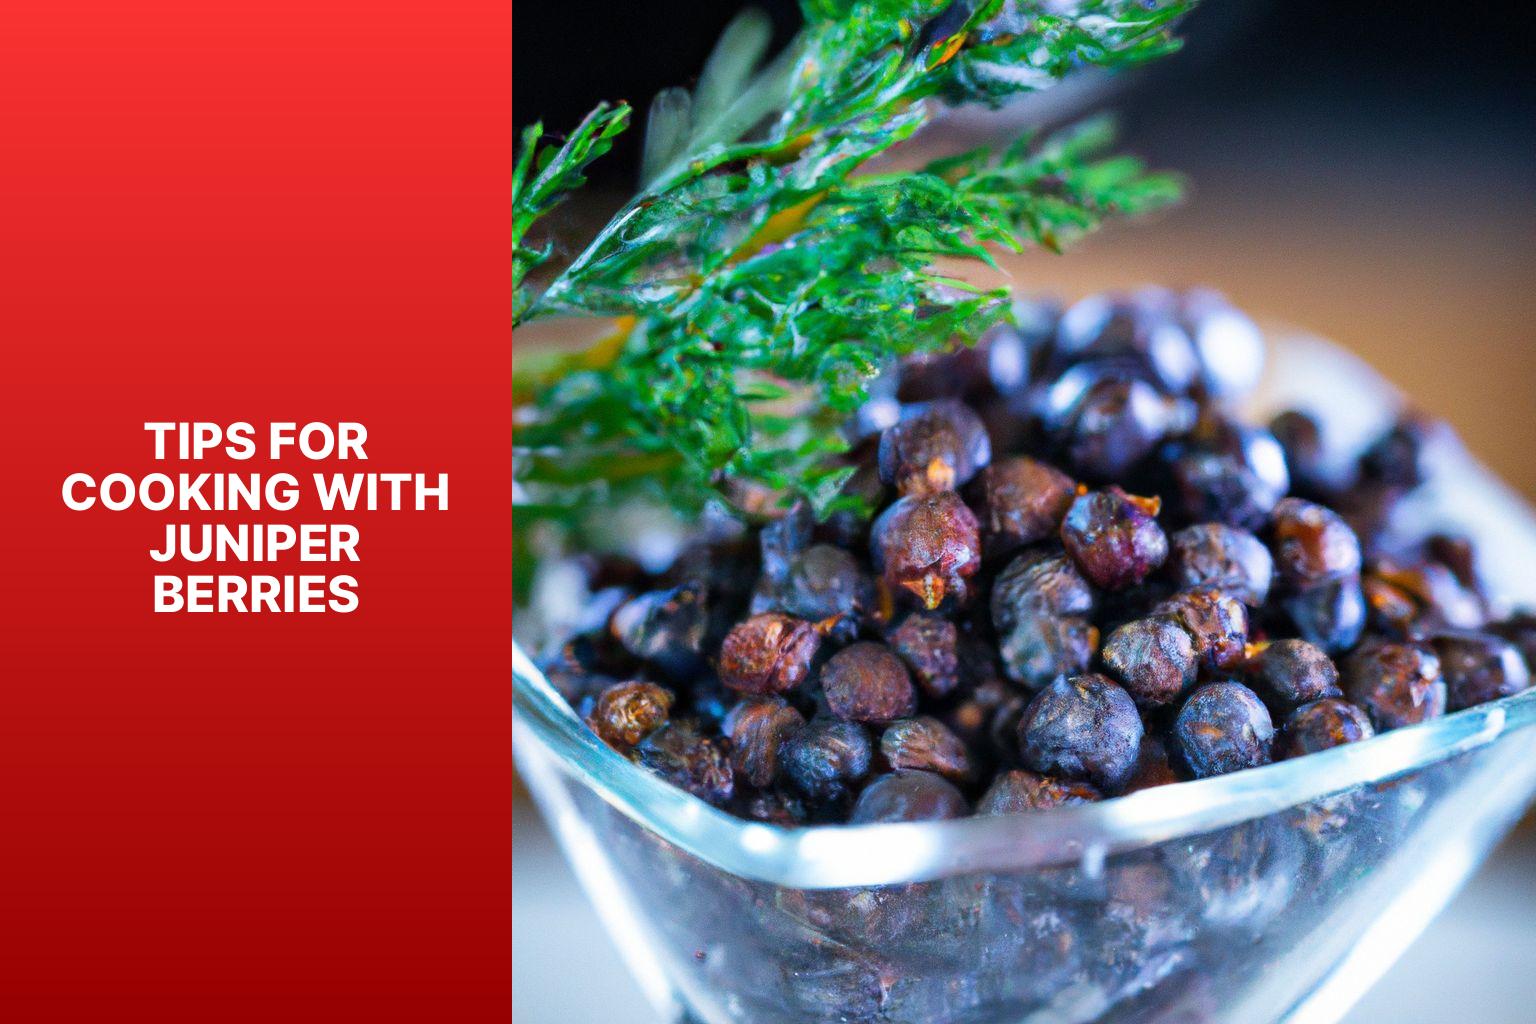 Tips for Cooking with Juniper Berries - Juniper Berries in Culinary Uses: Discuss creative ways to incorporate juniper berries into cooking, such as in marinades, sauces, and more. 